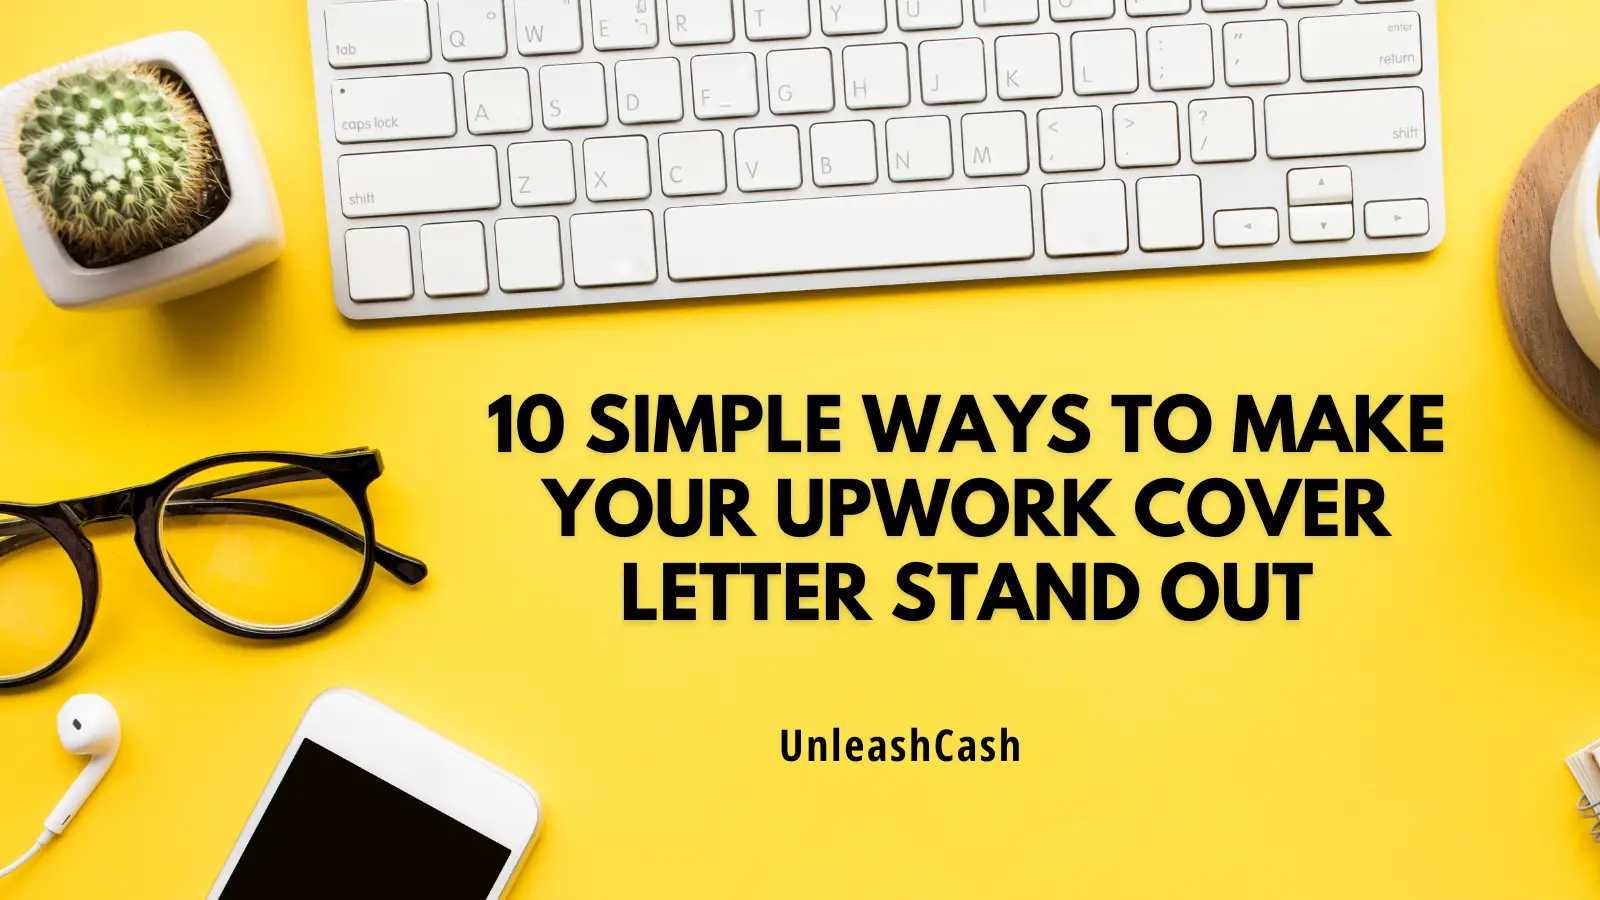 10 Simple Ways To Make Your Upwork Cover Letter Stand Out